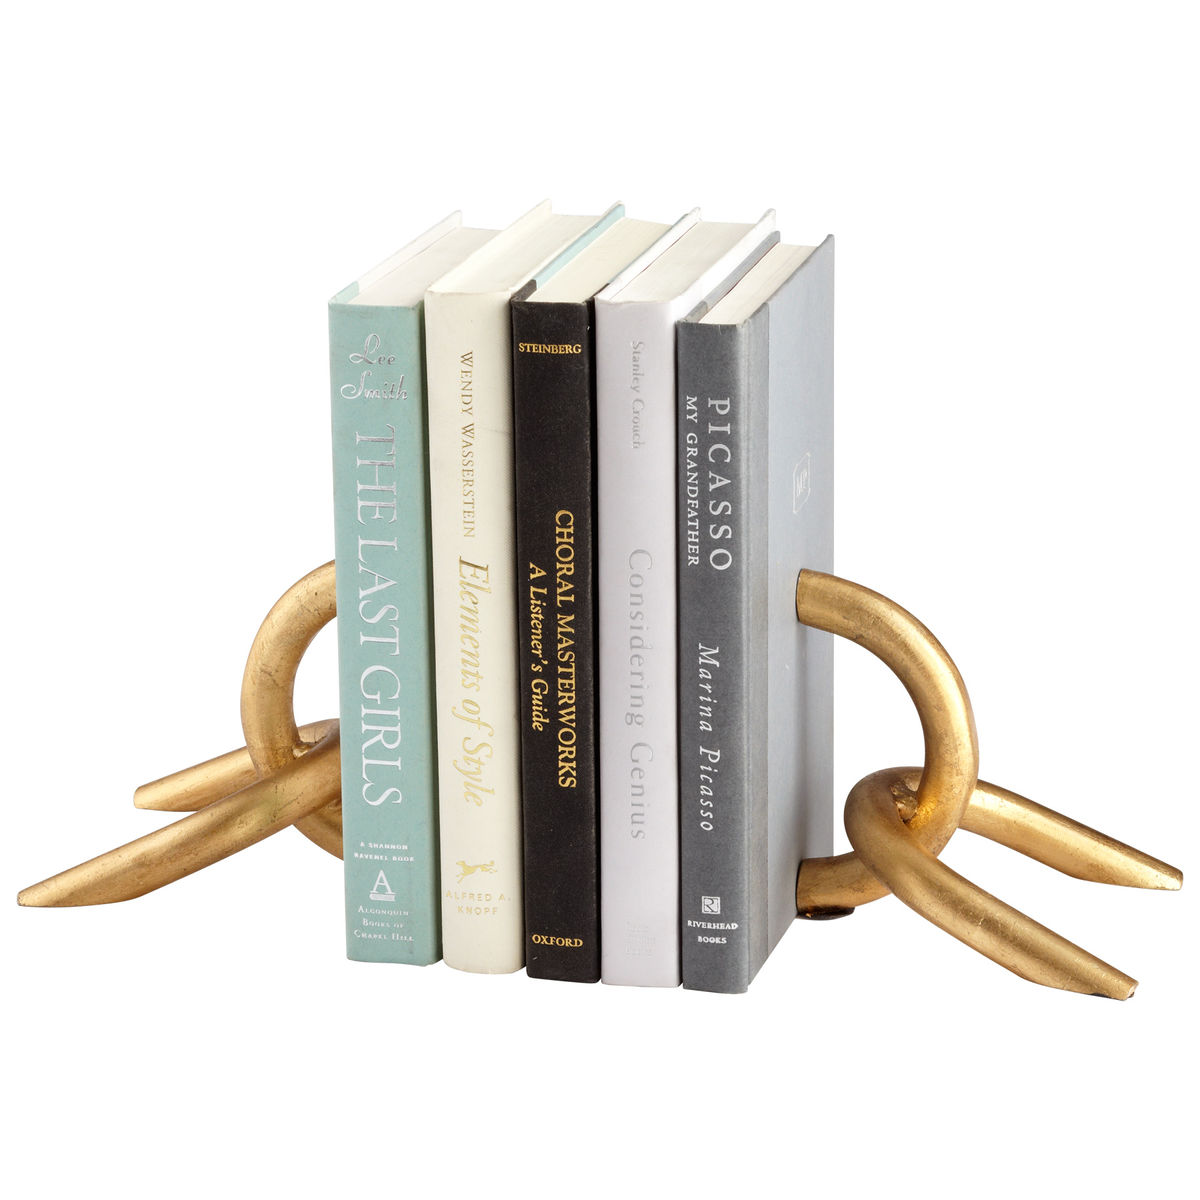 Shop Goldie Locks Bookends from DiMare Design on Openhaus